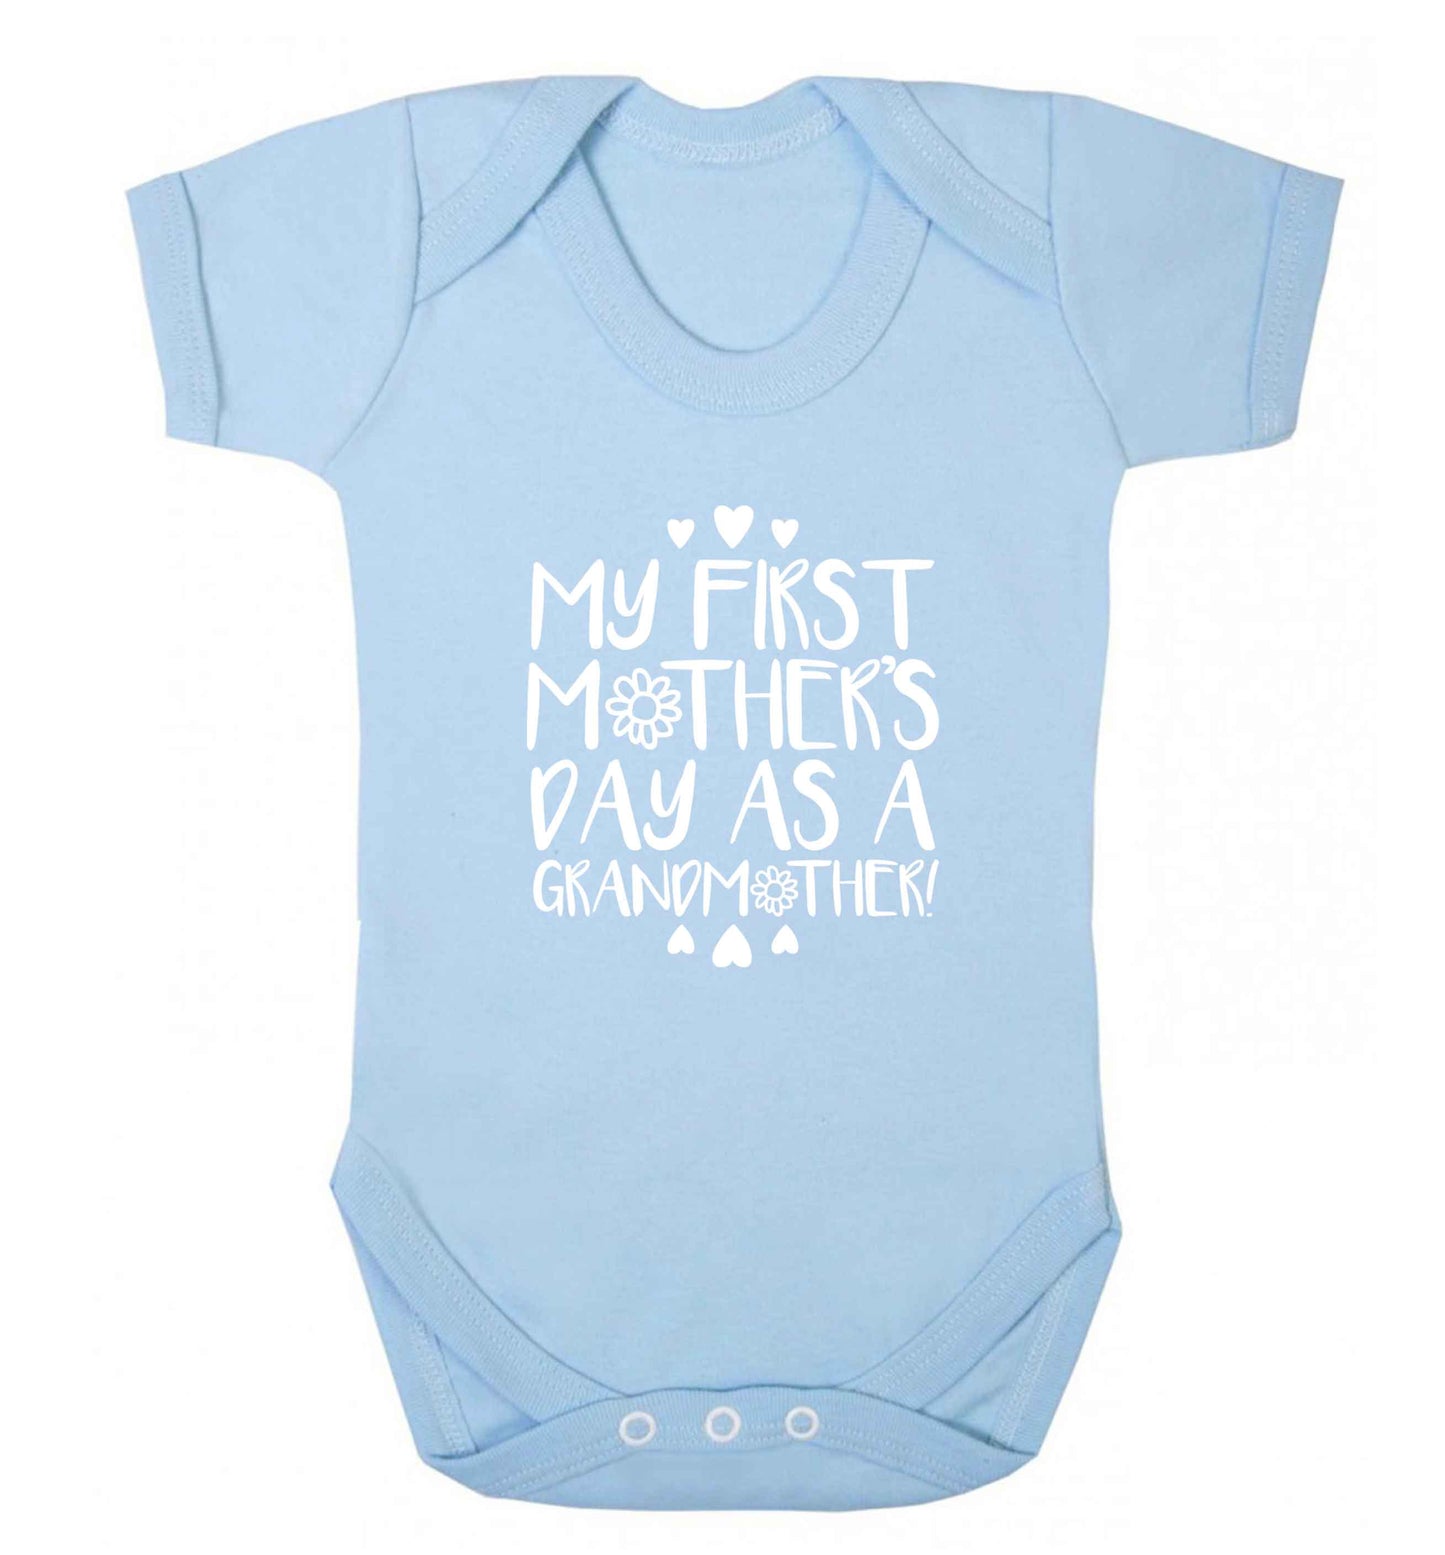 It's my first mother's day as a grandmother baby vest pale blue 18-24 months